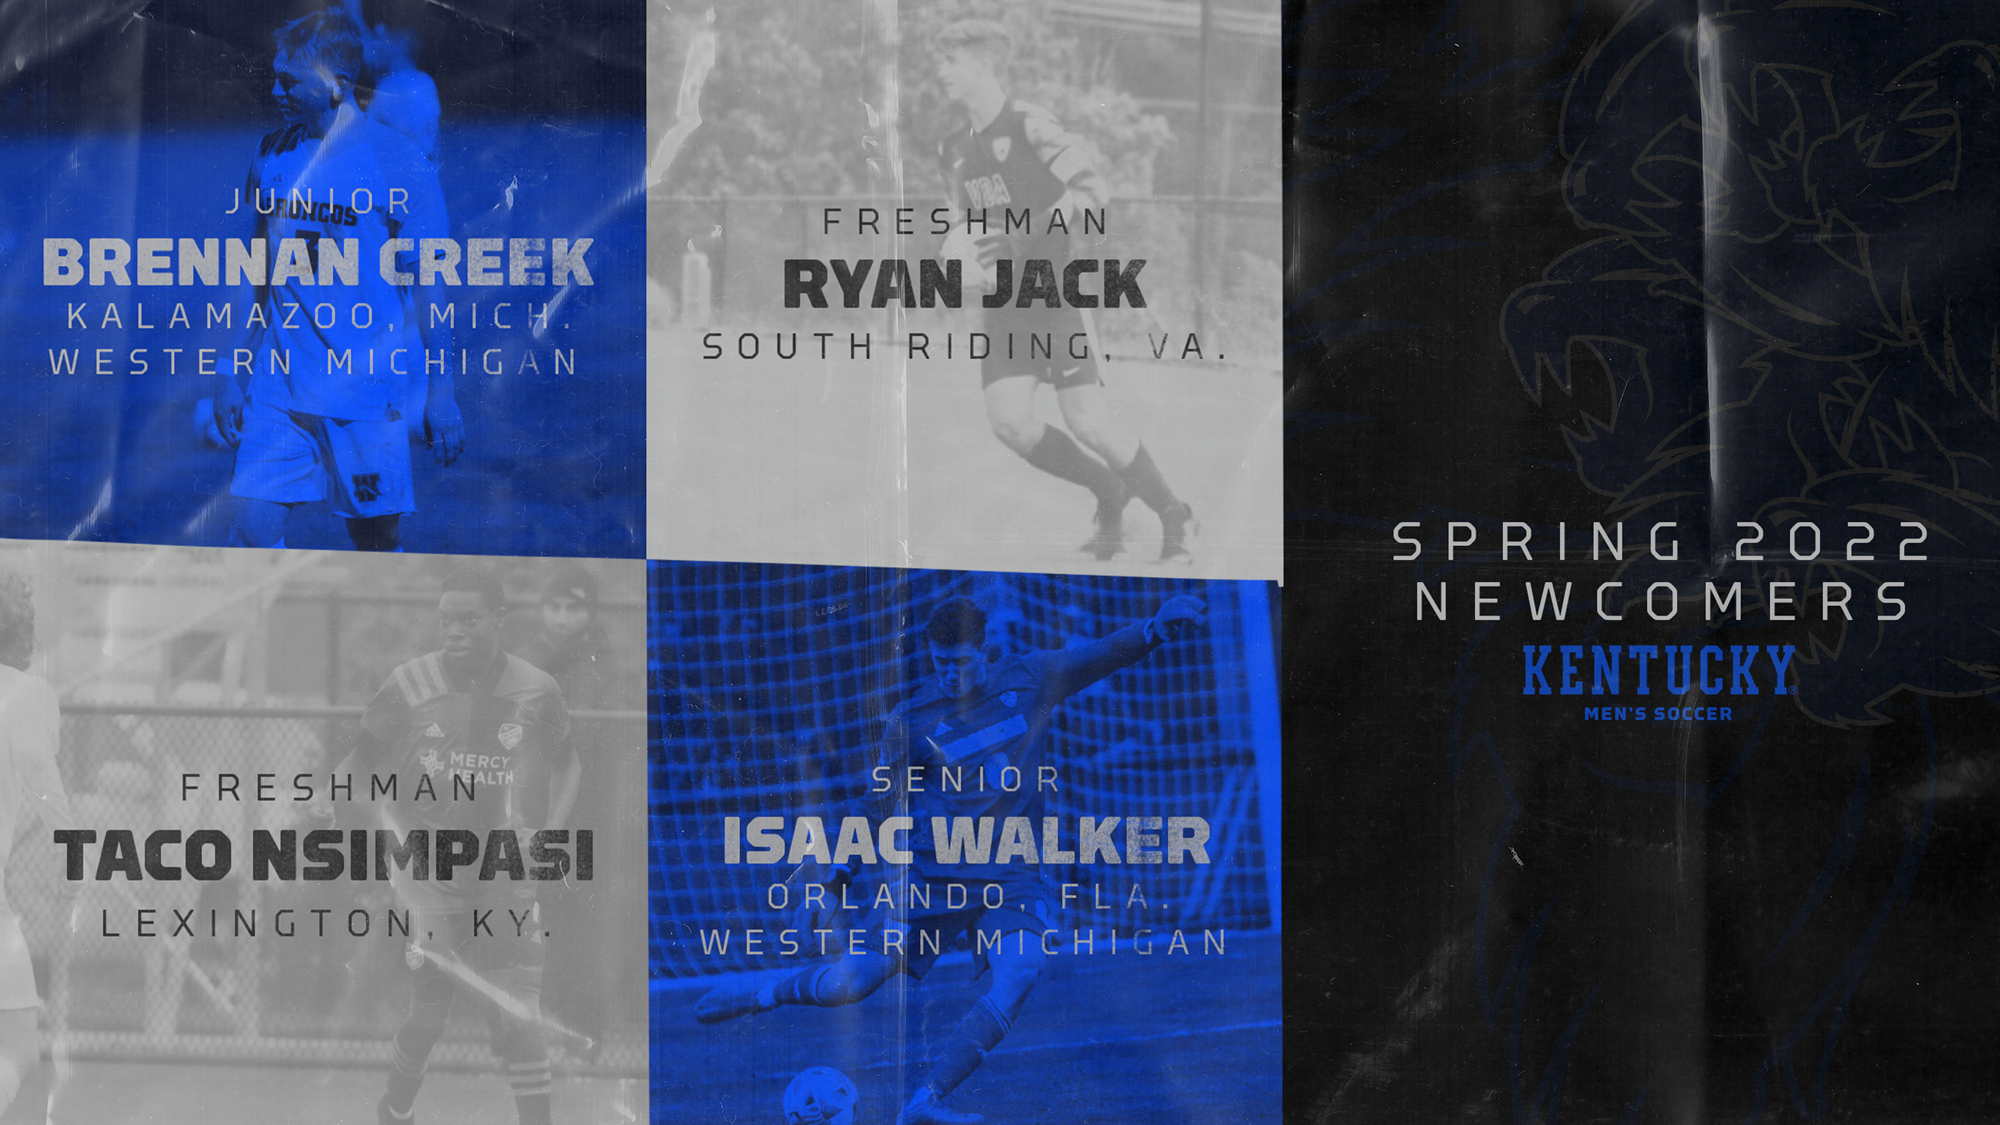 Kentucky Men’s Soccer Adds Four Newcomers for Spring 2022